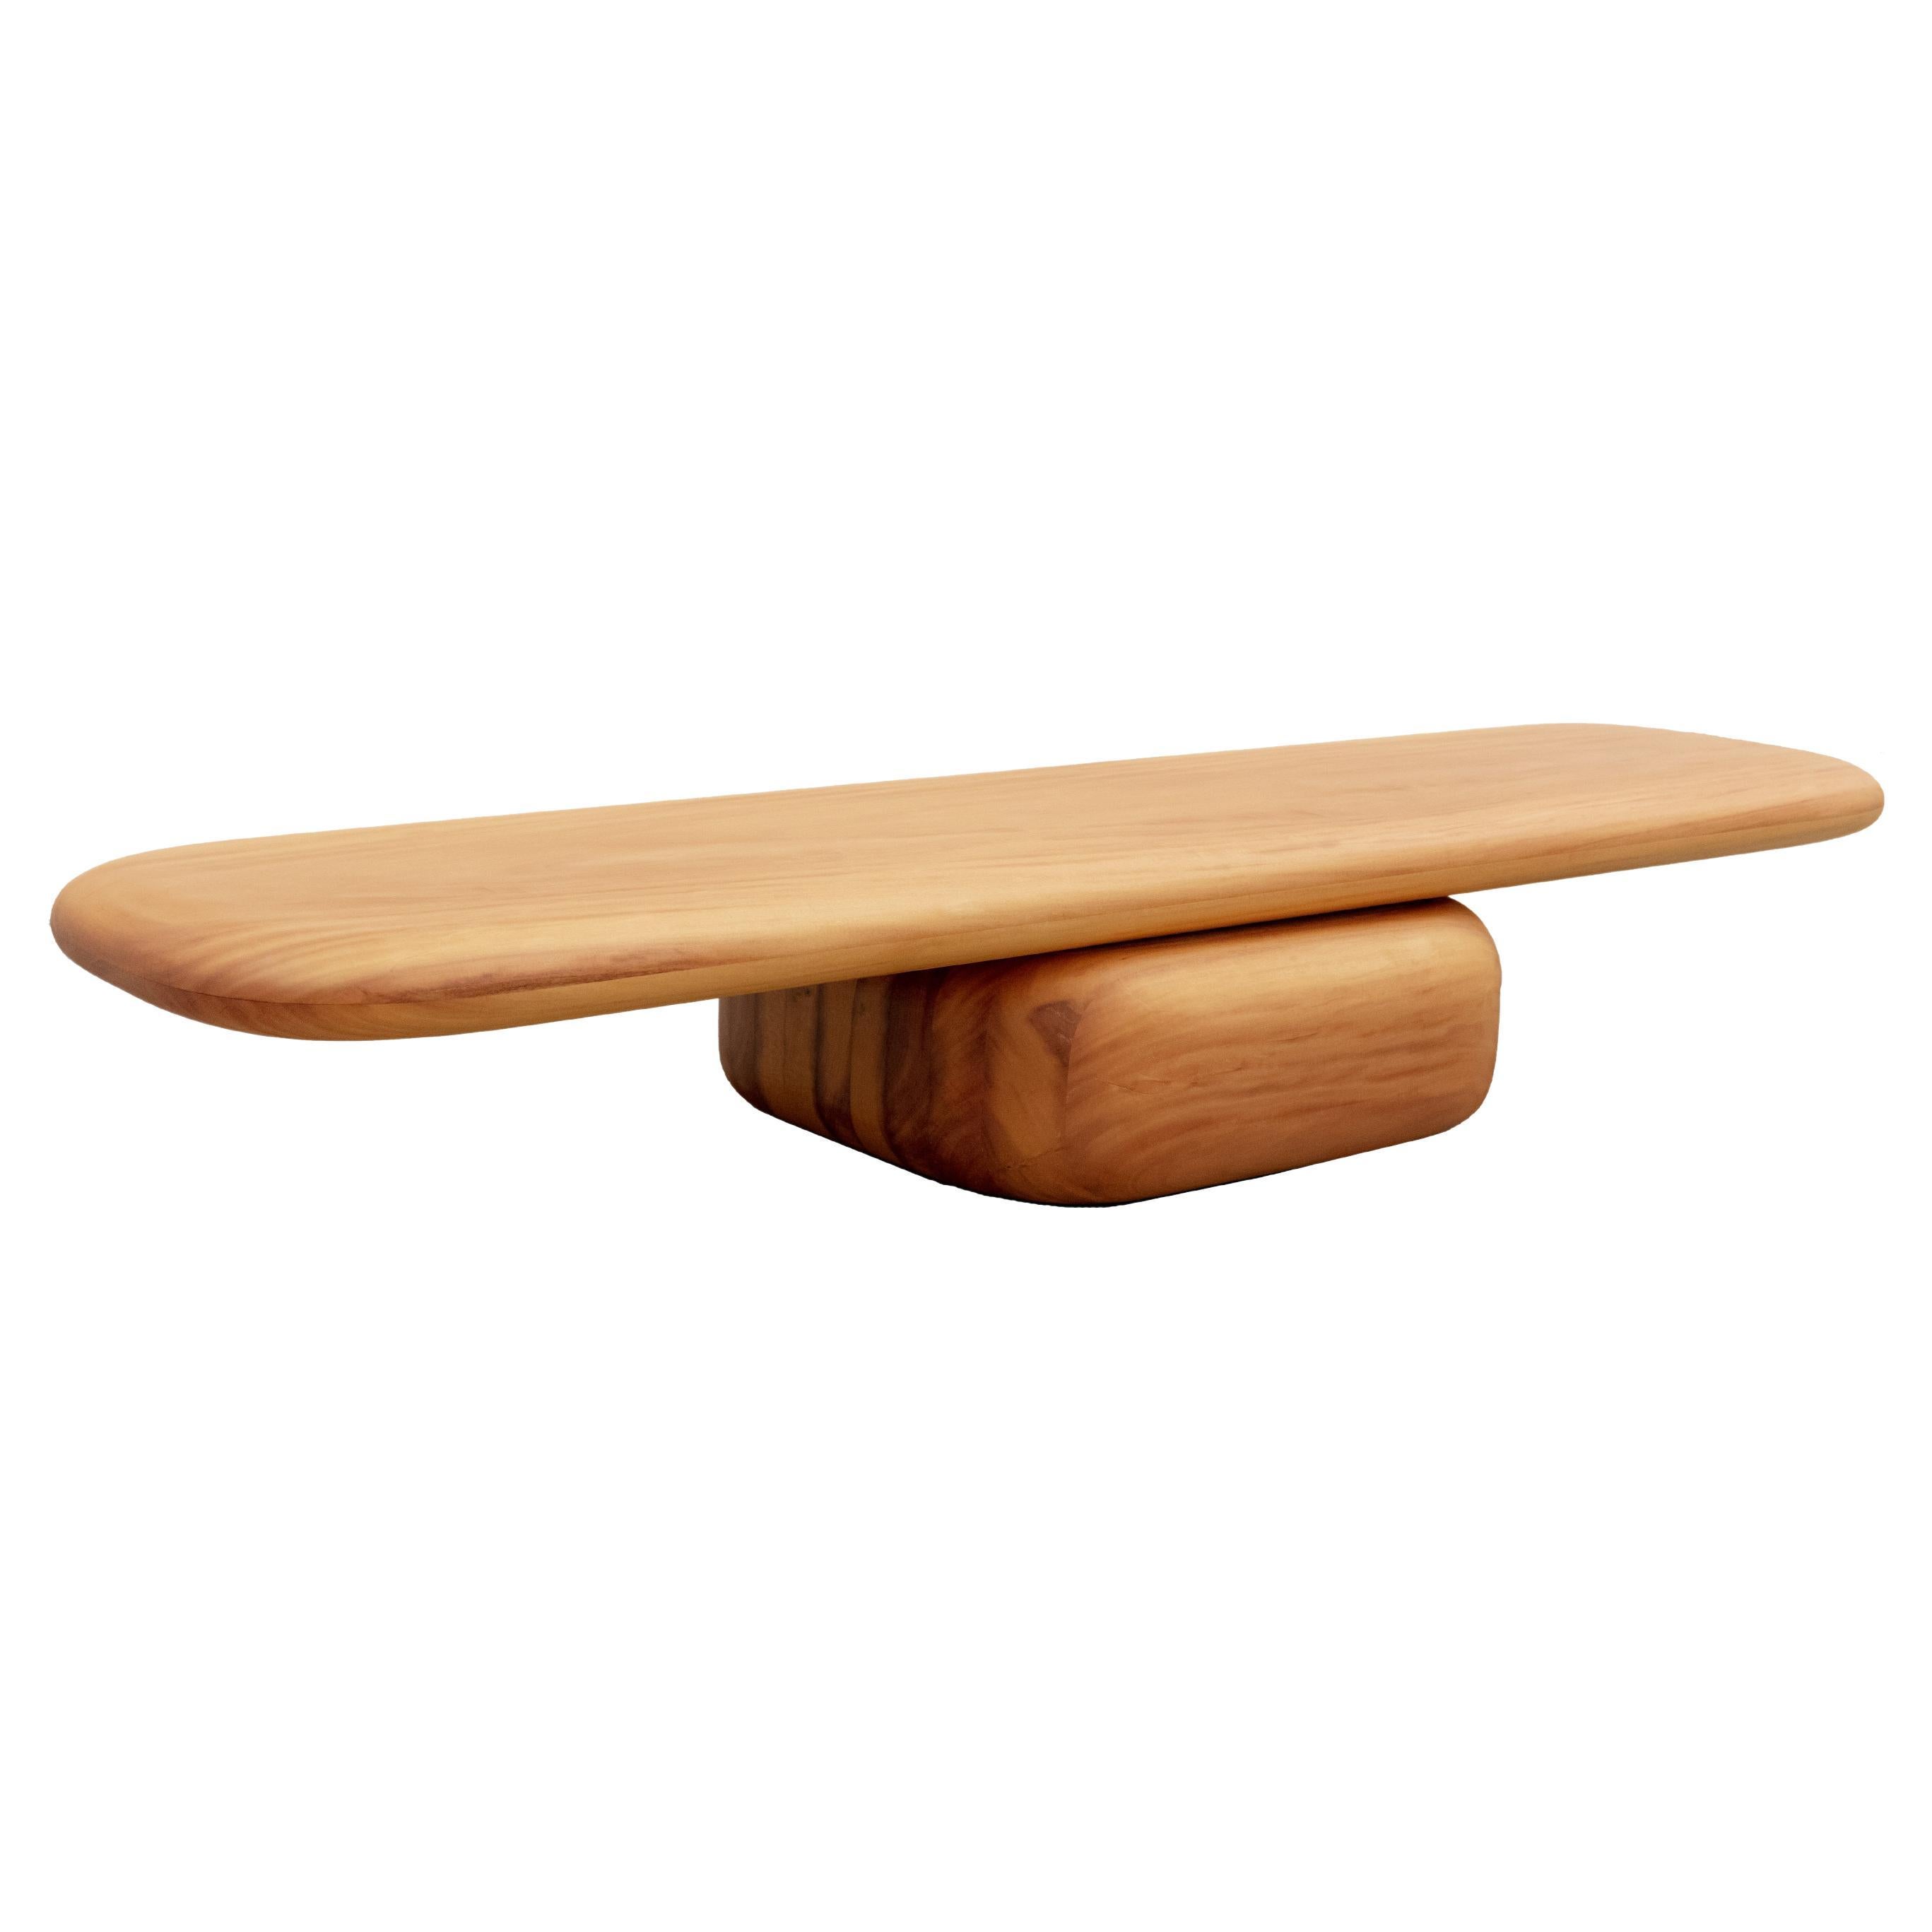 Solida Center Table, by Rain, Contemporary Center Table, Solid Garapá Wood